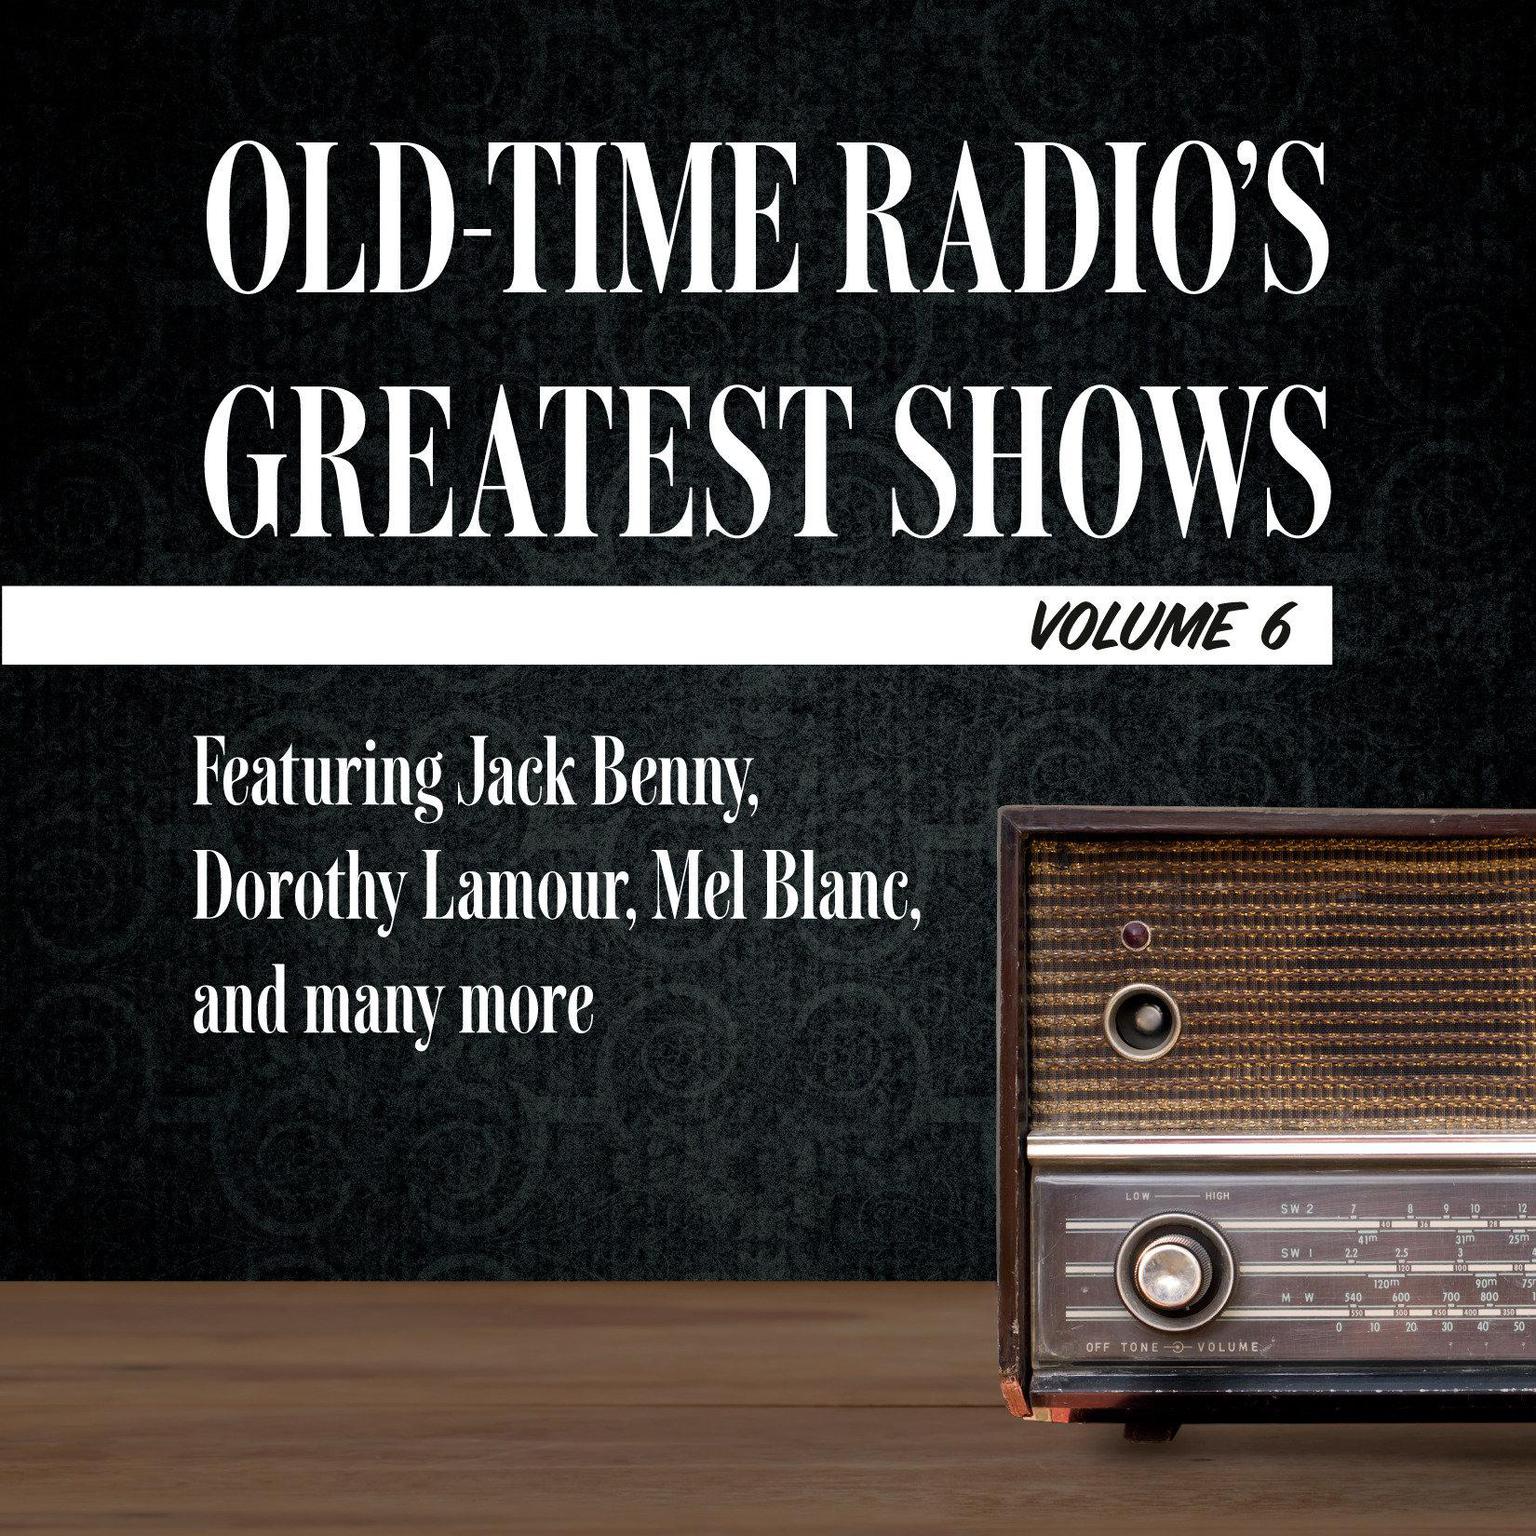 Old-Time Radios Greatest Shows, Volume 6: Featuring Jack Benny, Dorothy Lamour, Mel Blanc, and many more Audiobook, by Carl Amari